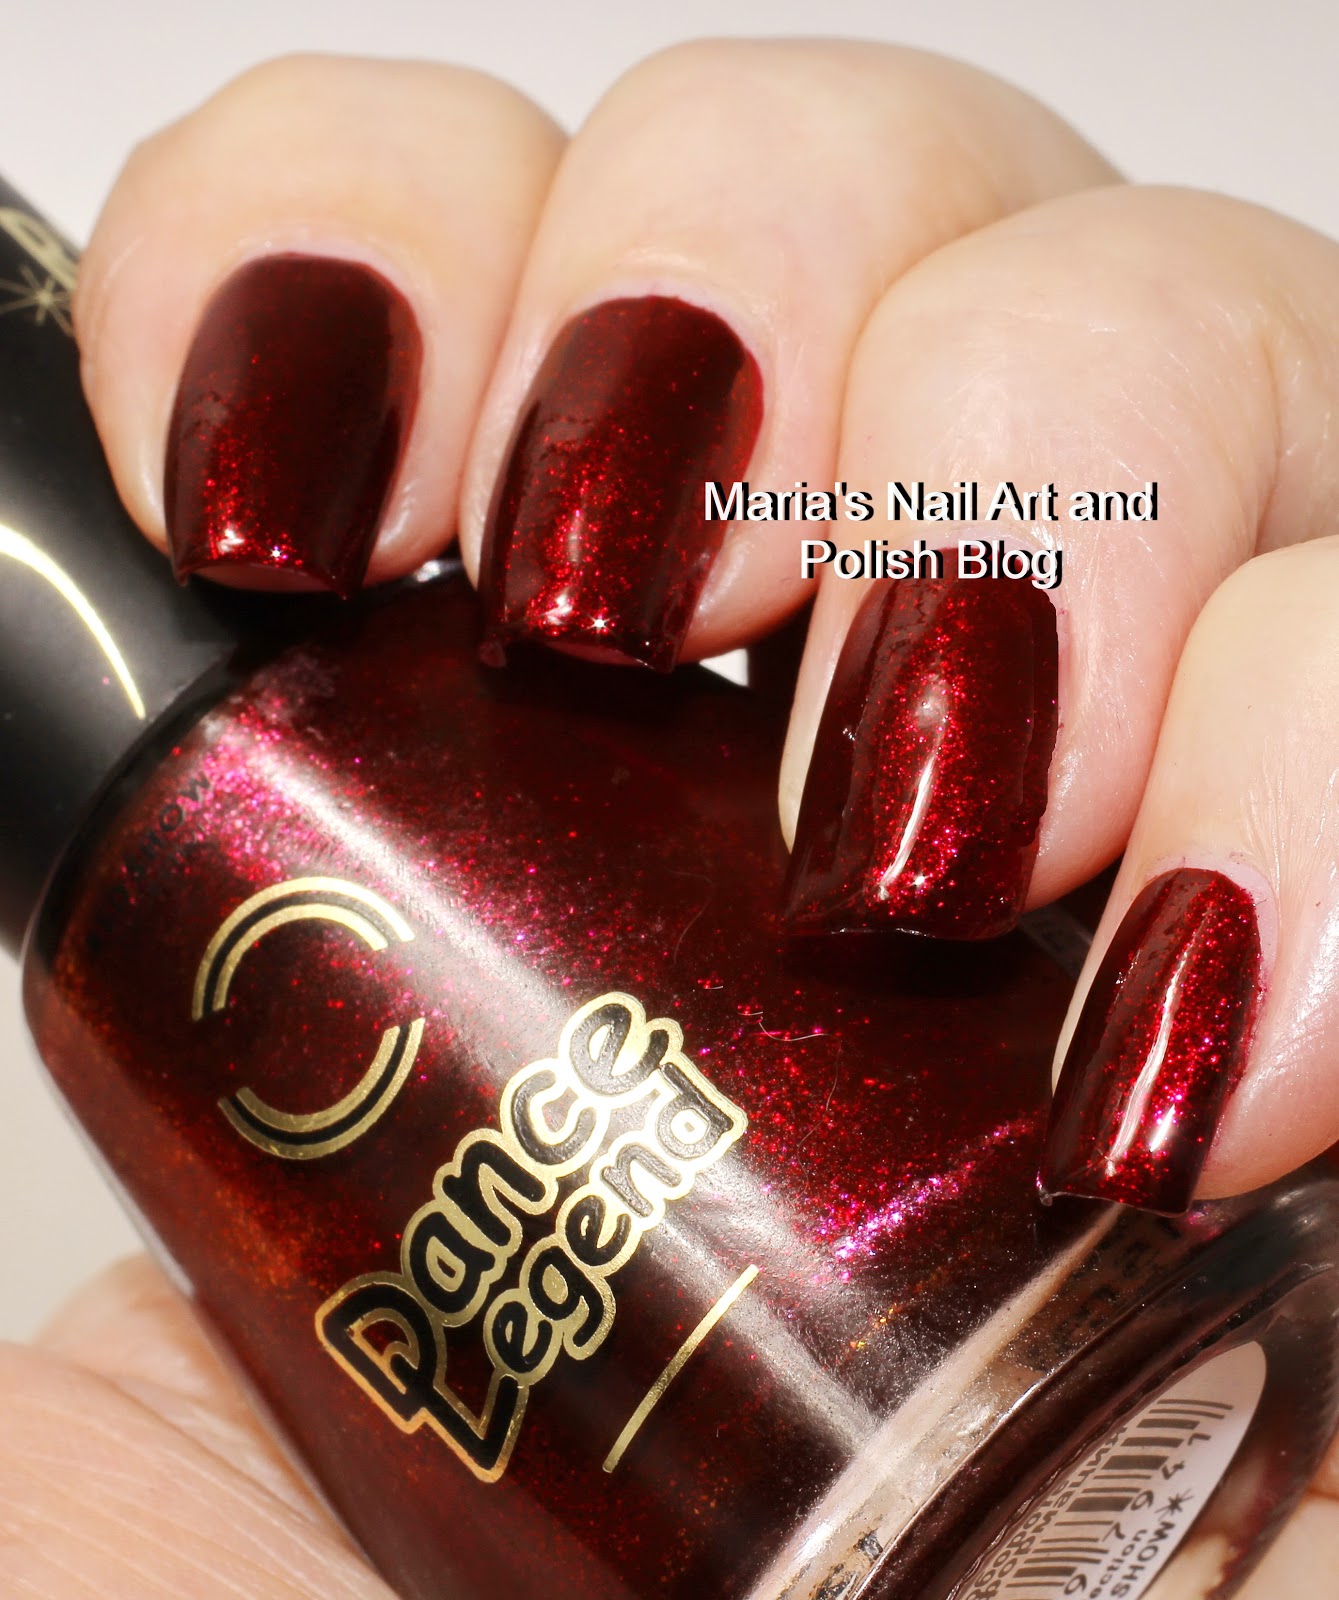 Marias Nail Art and Polish Blog: Dance Legend Red Show 07 swatches